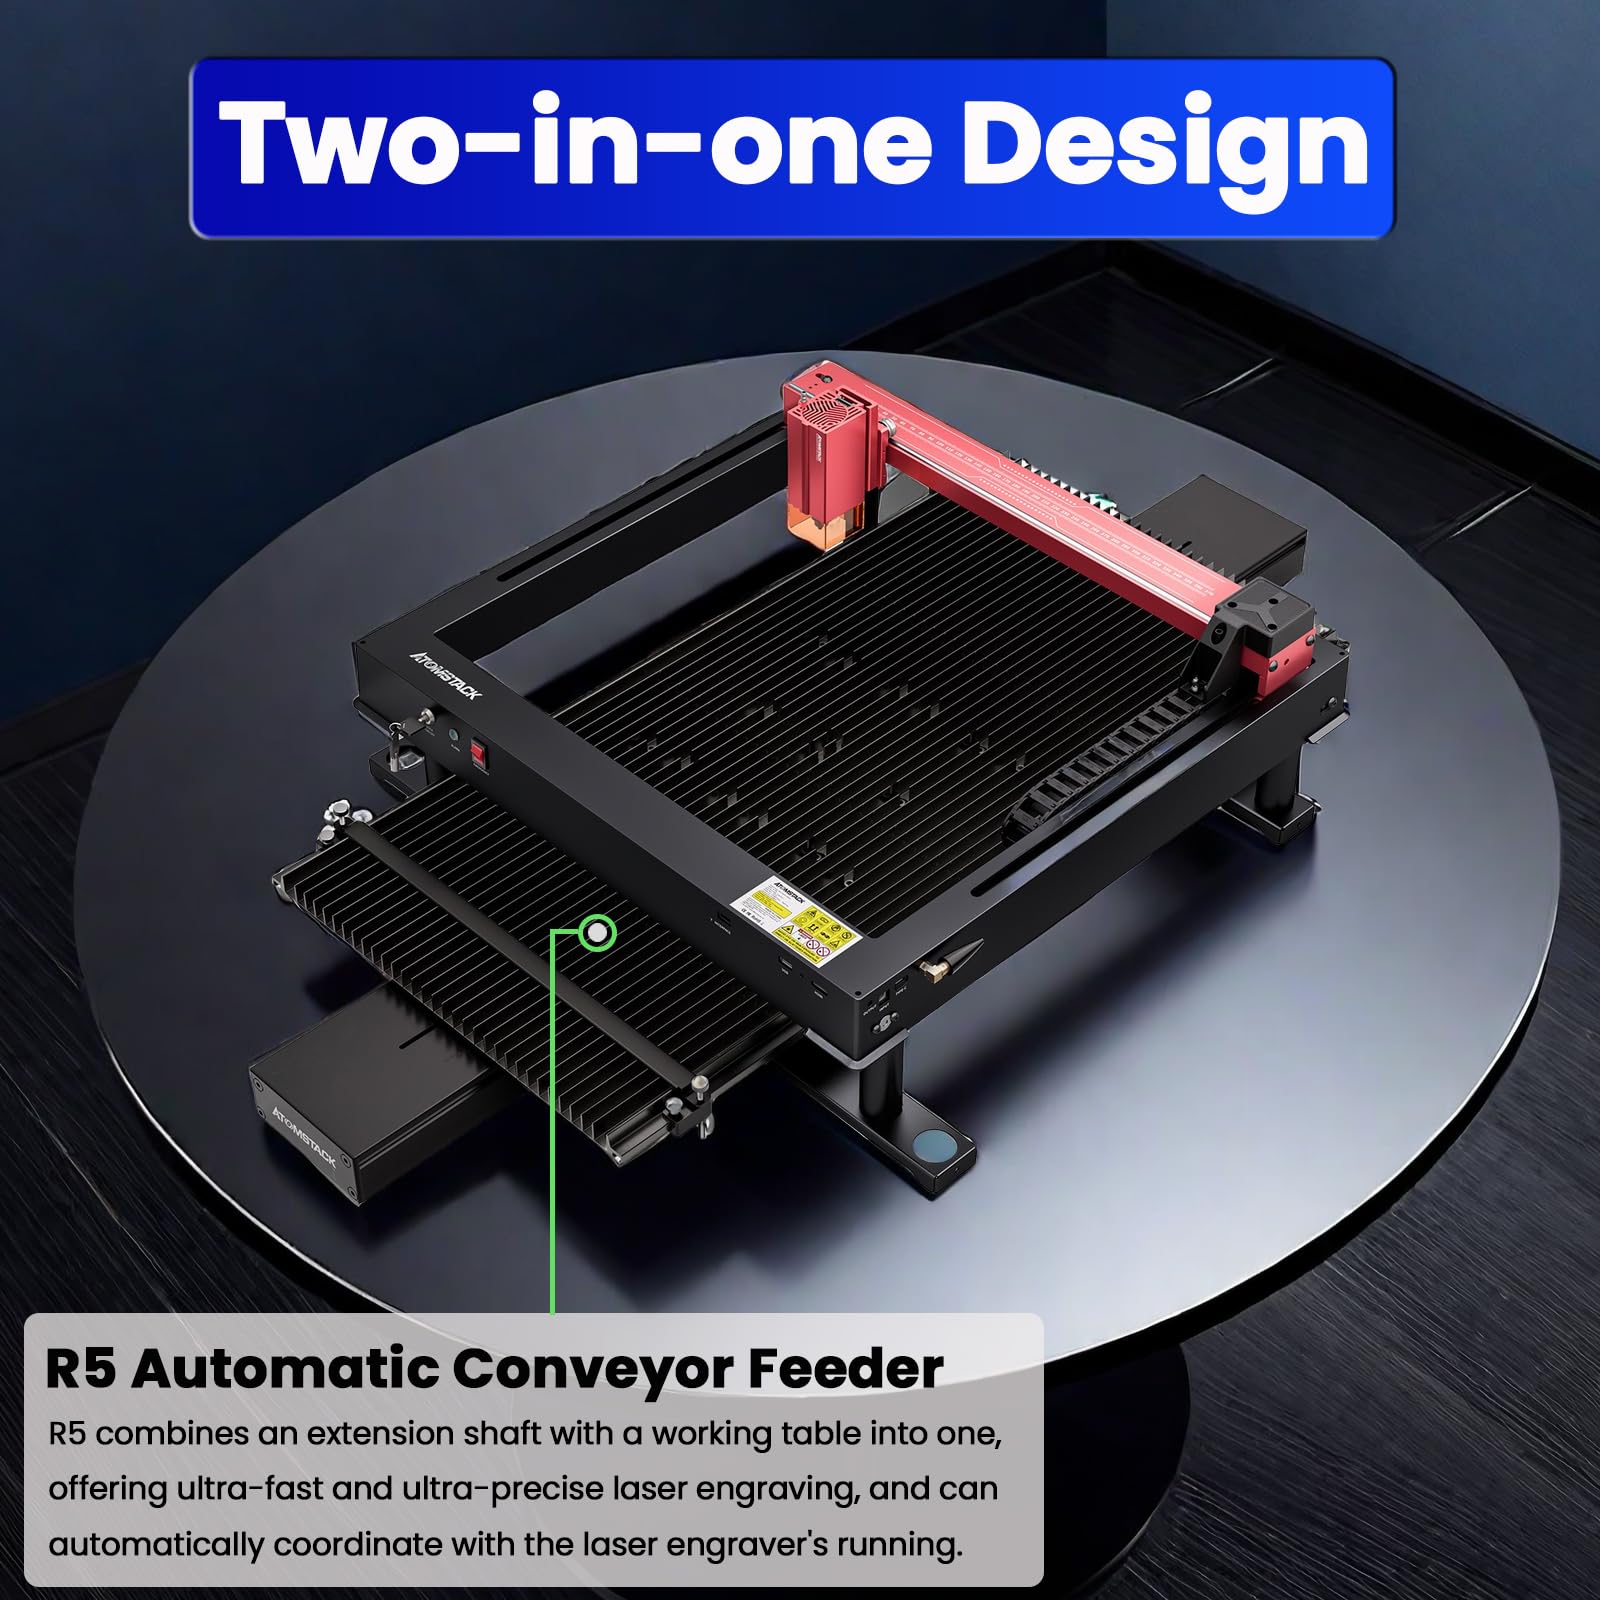 ATOMSTACK R5 Automatic Conveyor Feeder for Laser Engraver, 800*400*40mm Ultra-large Levitating Working Table, Mobile Extension Kit with 400mm/s Max Speed, Support Batch Laser Engraving and Cutting